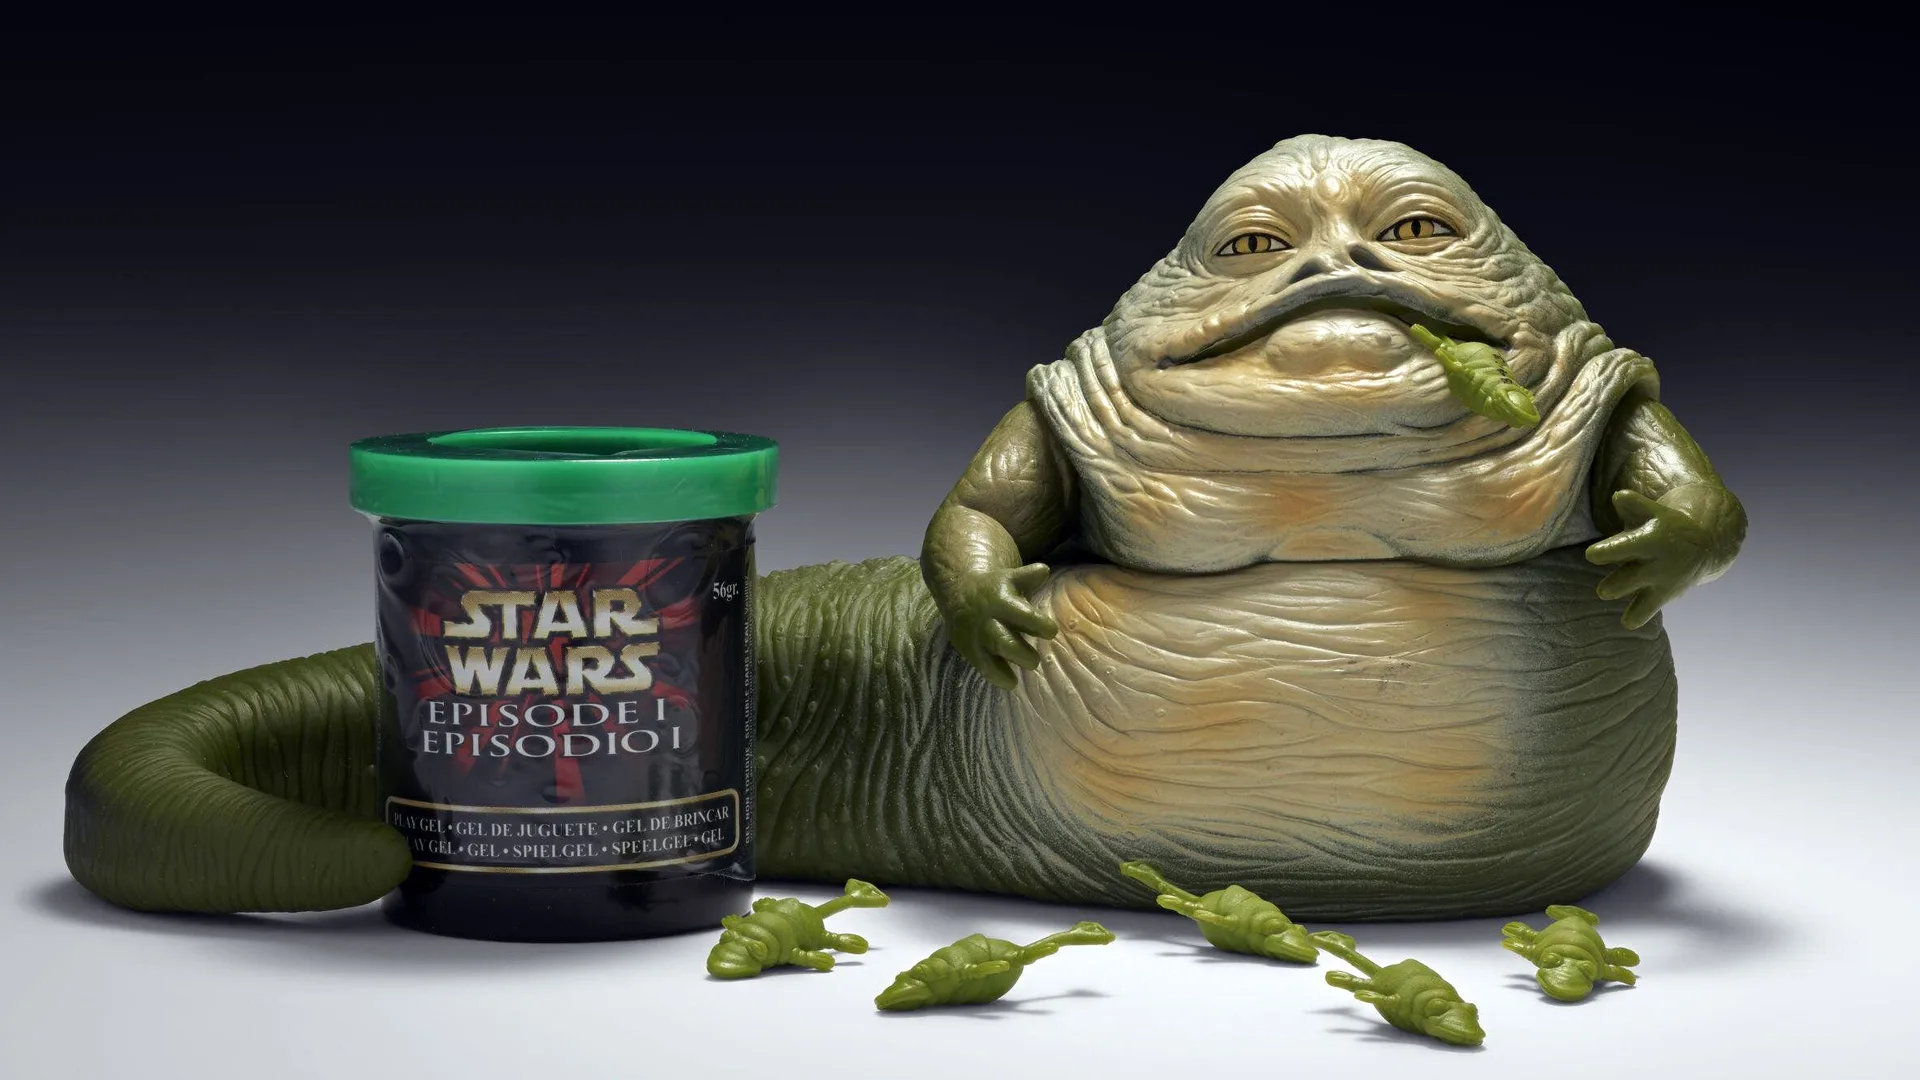 A photo of the V&A collection of a toy Jabba the Glob made by Hasbro for the Star Wars film The Phantom Menace. The toy is green and shows Jabba with a frog hanging out of his mouth next to a tub of Star Wars slime.